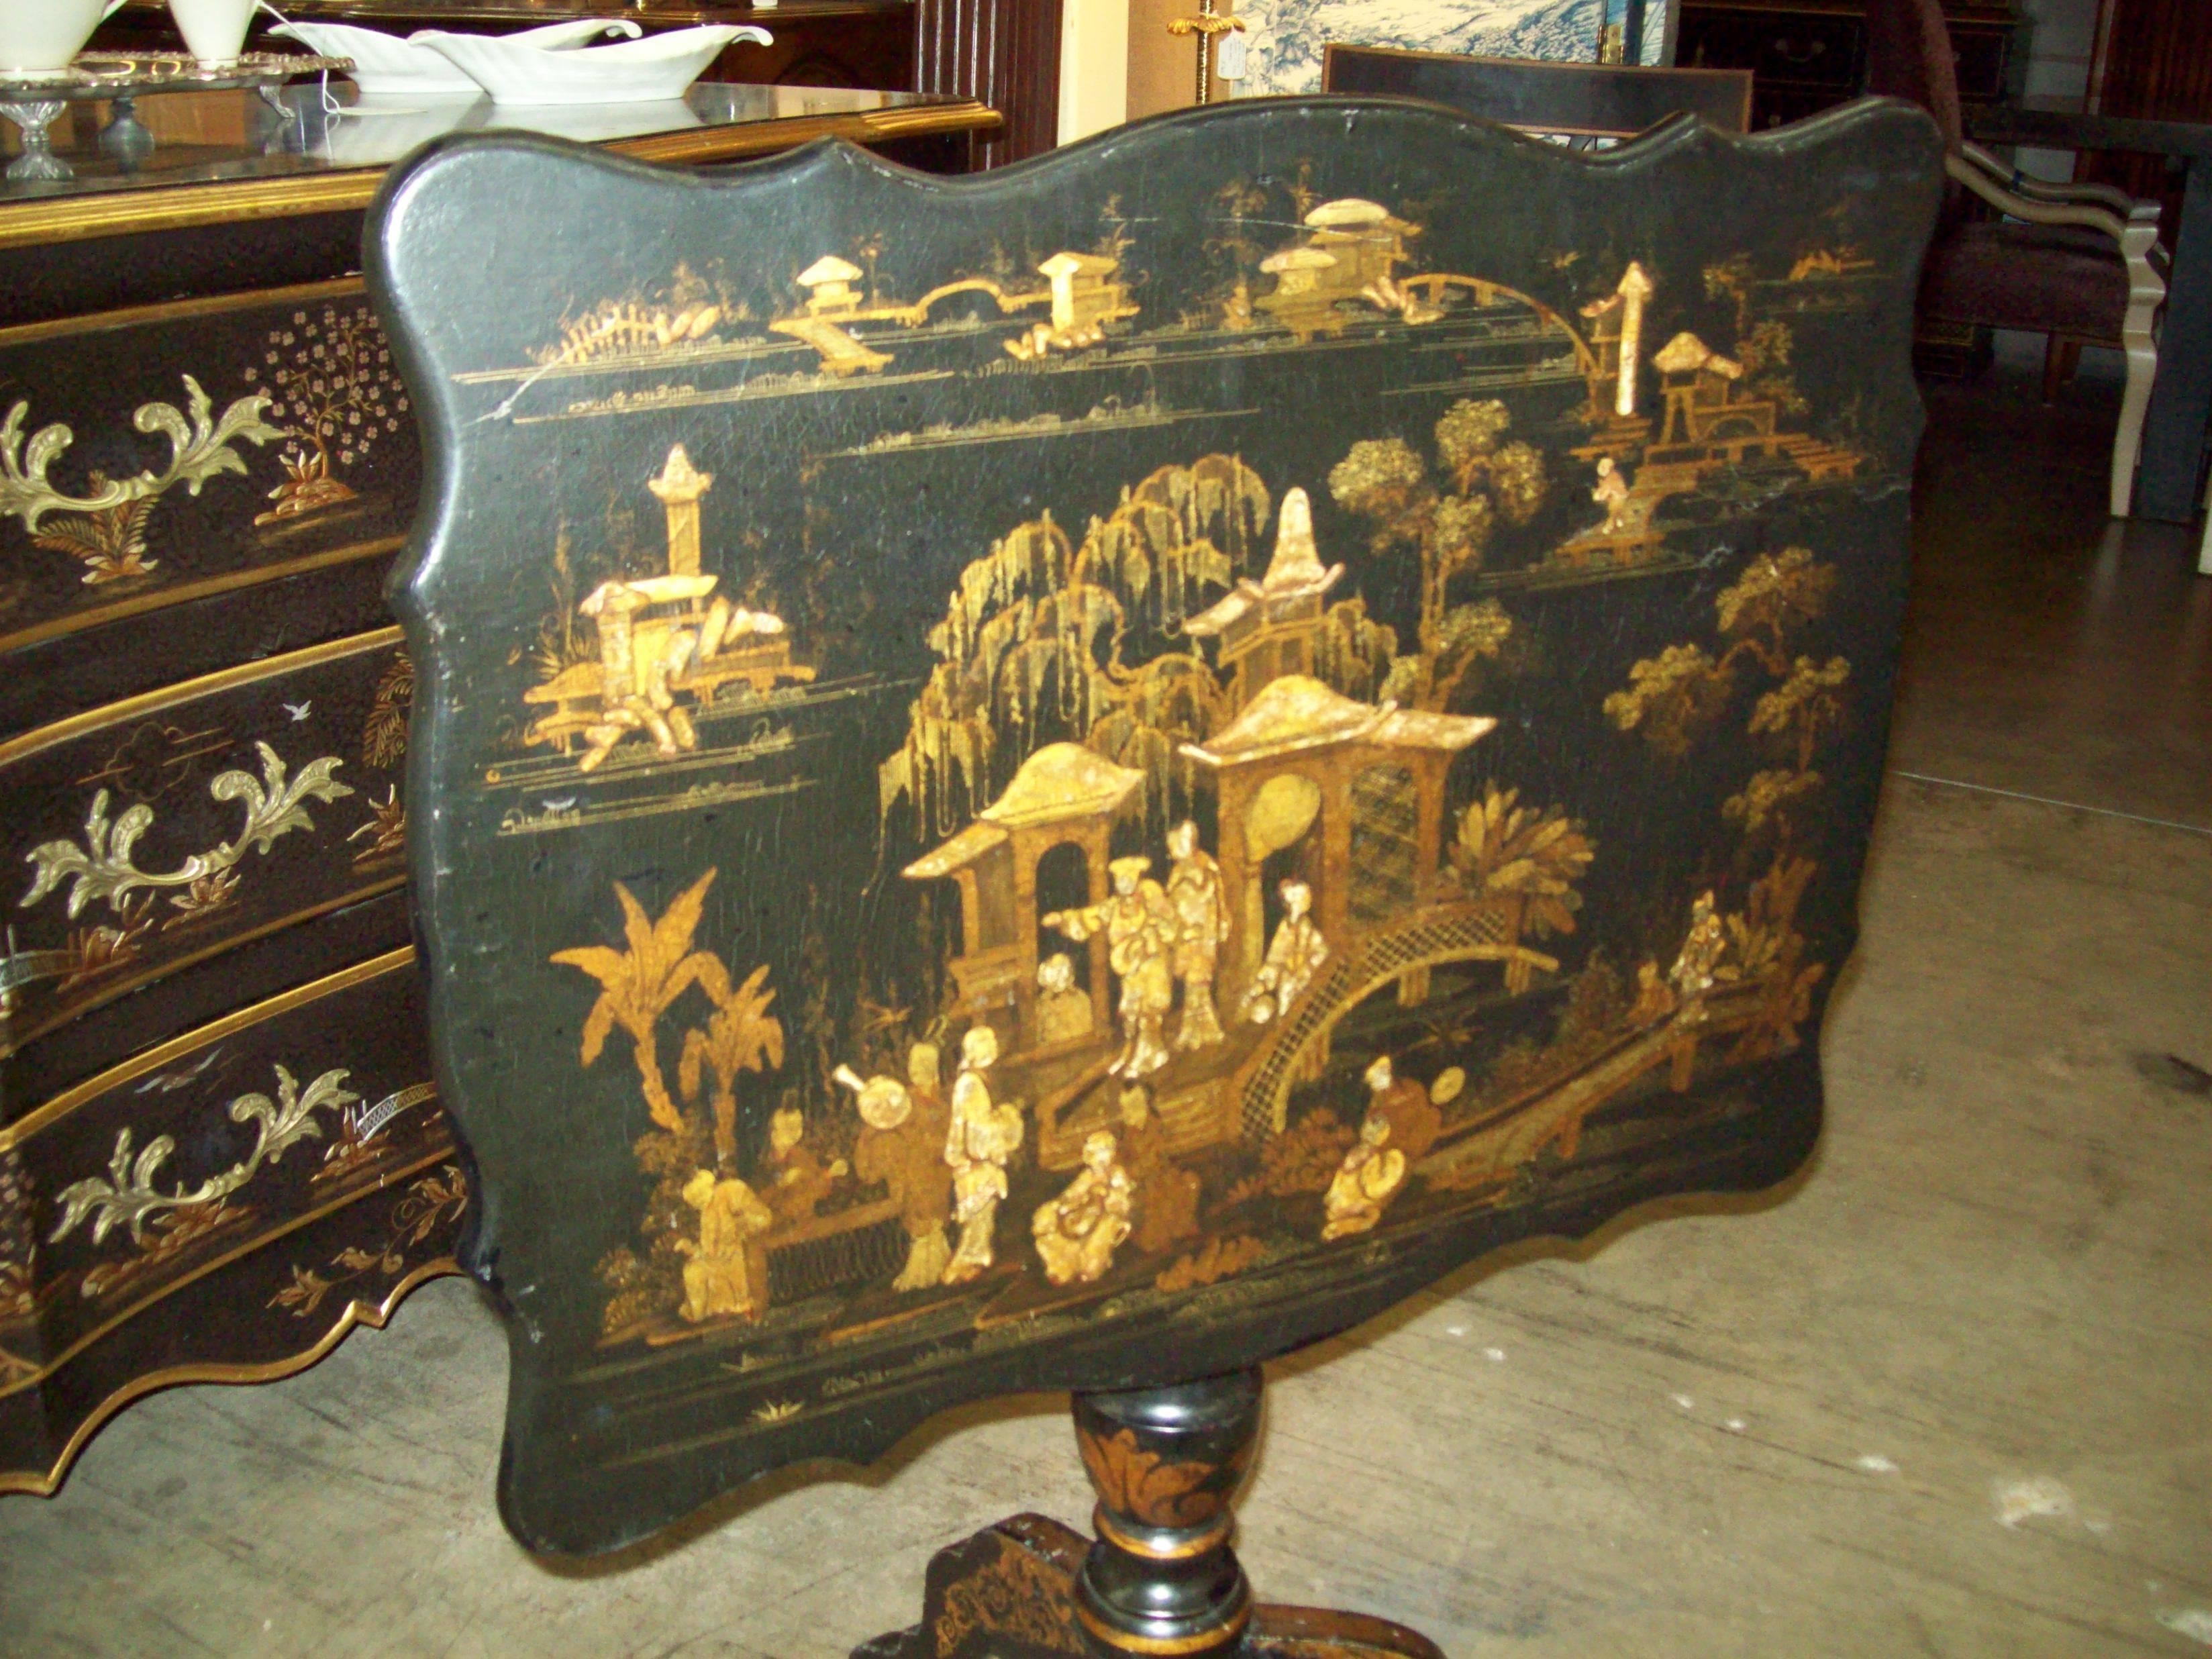 An English 19th century chinoiserie tilt-top rectangular table decorated in black and gold lacquer, with beautifully detailed shaped top and tripod base. Intricate gold lacquer designs appear intact with no apparent signs of flaking.